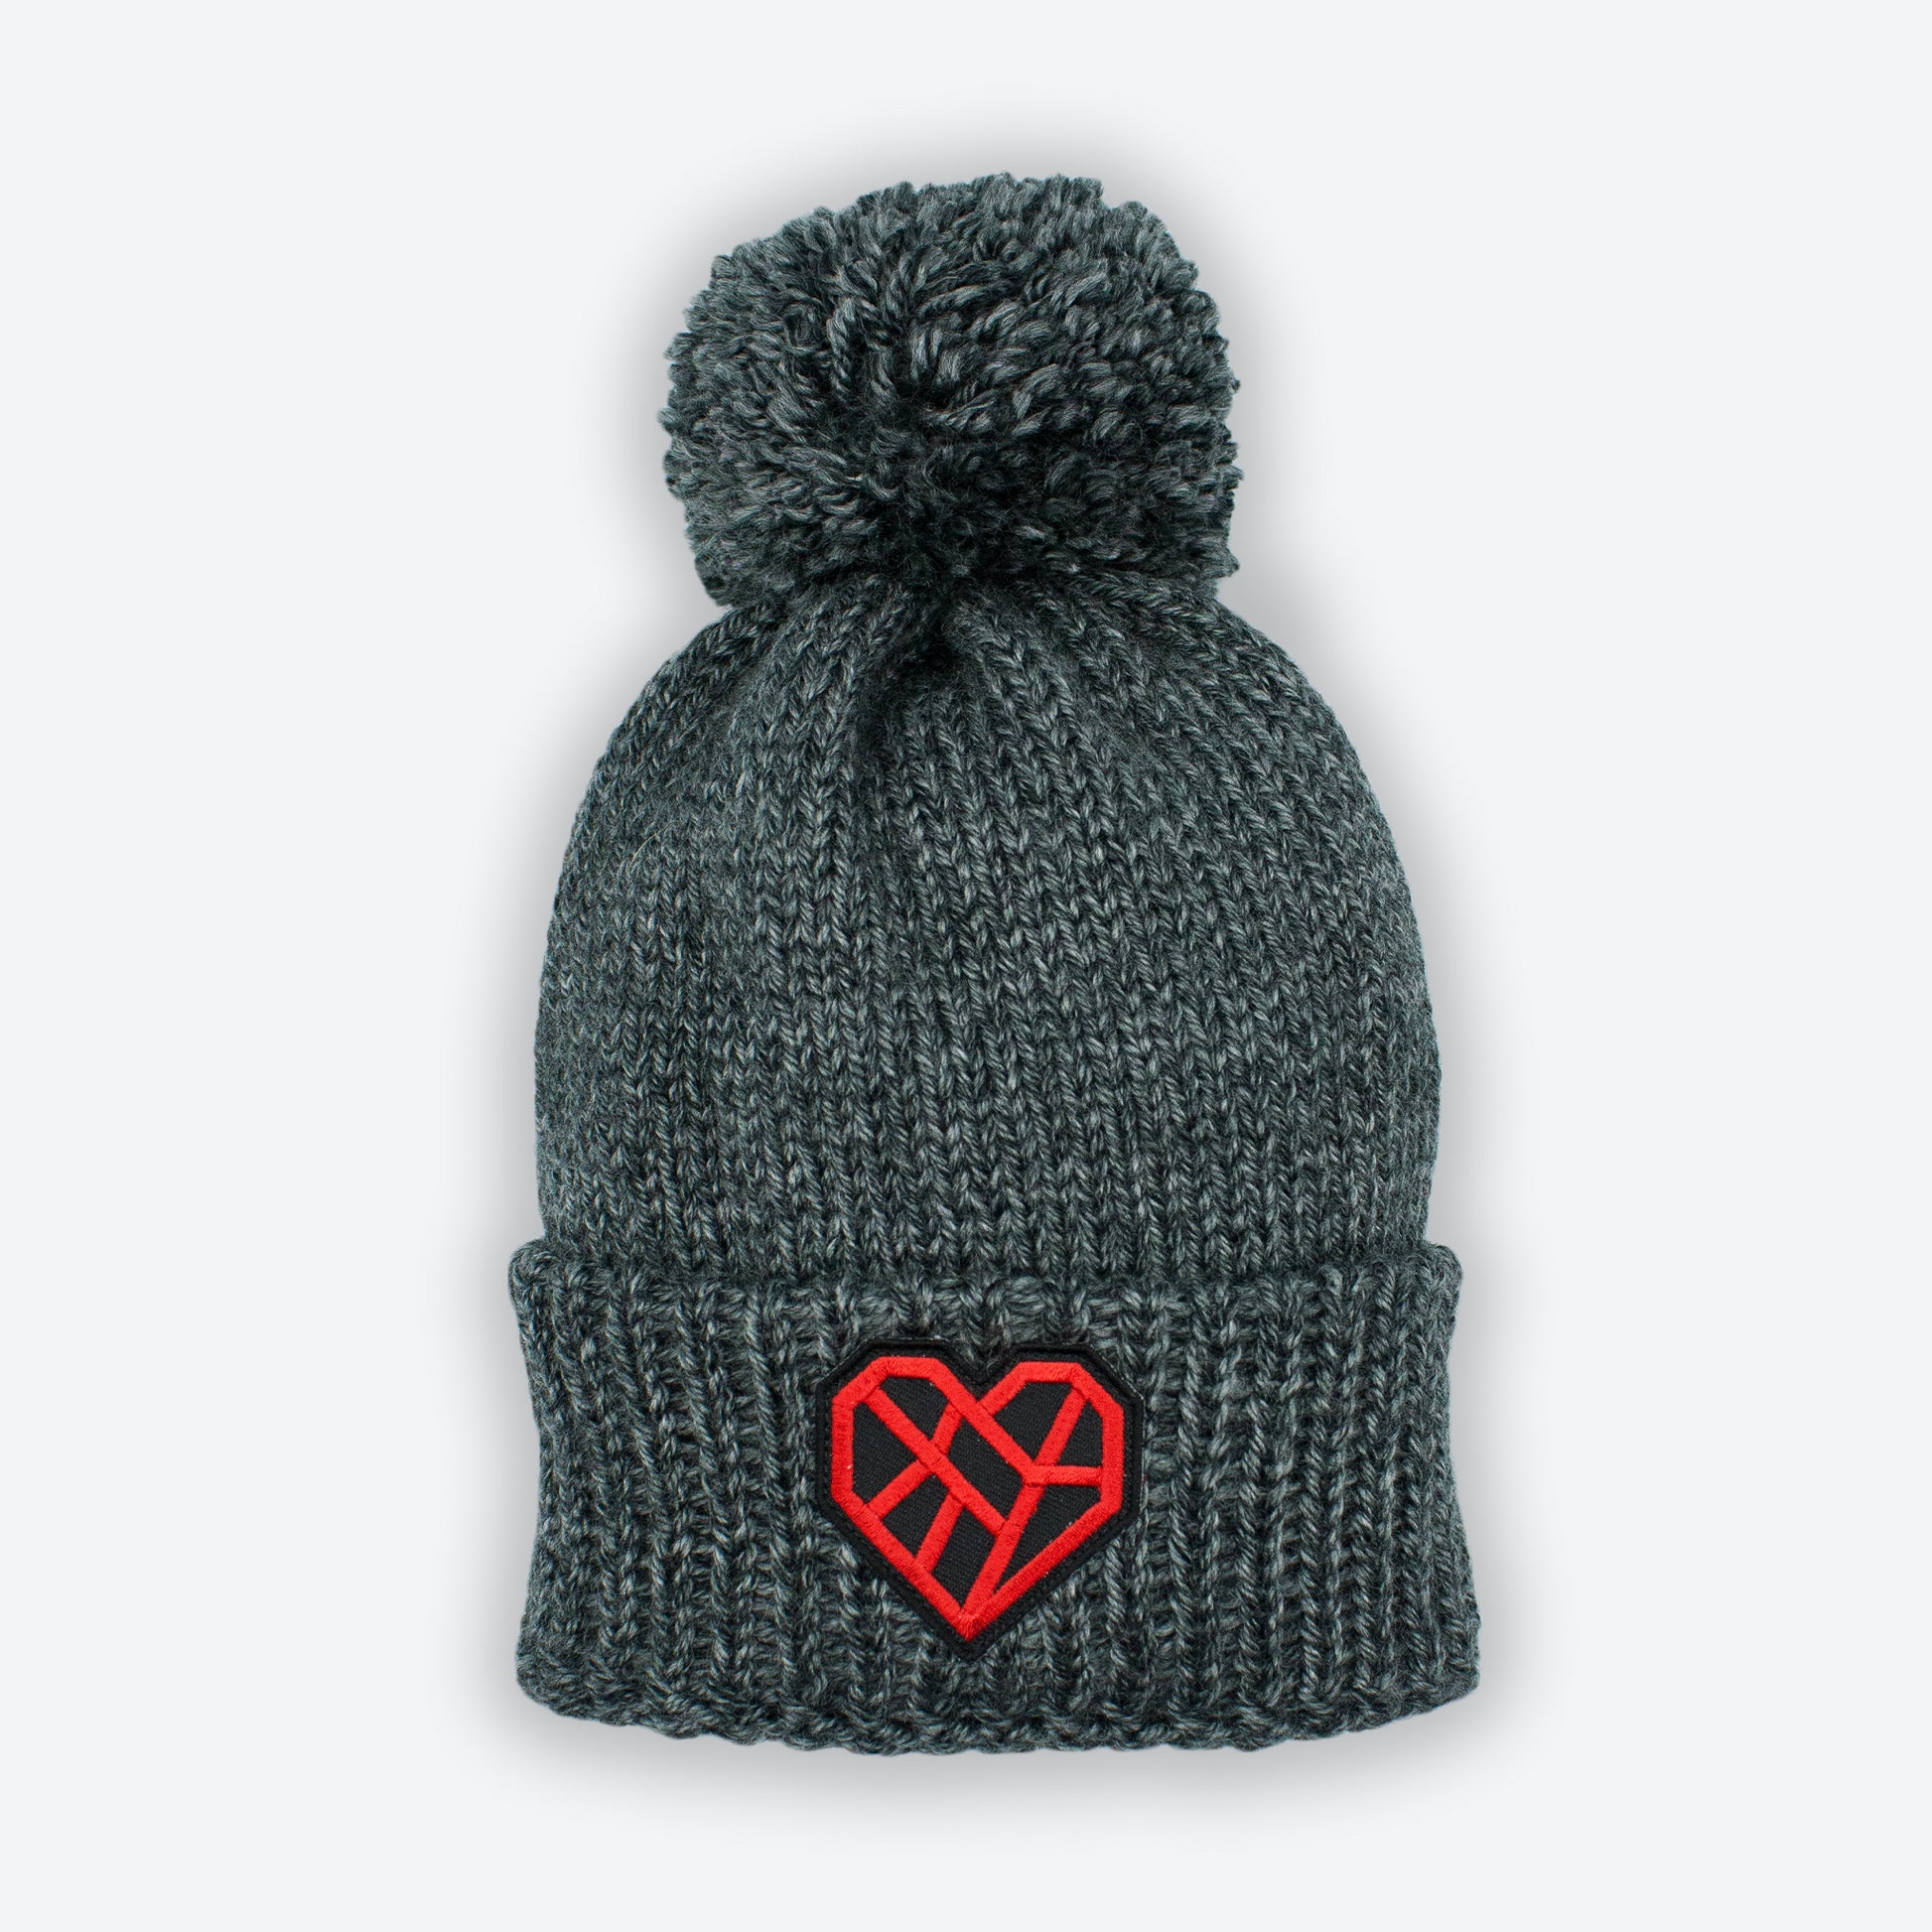 Chunky charcoal gray color knitted beanie hat. It has a wide cuff on the bottom and a large pom pom on top. An embroidered Mended Heart patch in on the front cuff on the beanie. The Mended Heart has angular lines that are a warm and bright red in color. They form a heart shape on a black background.